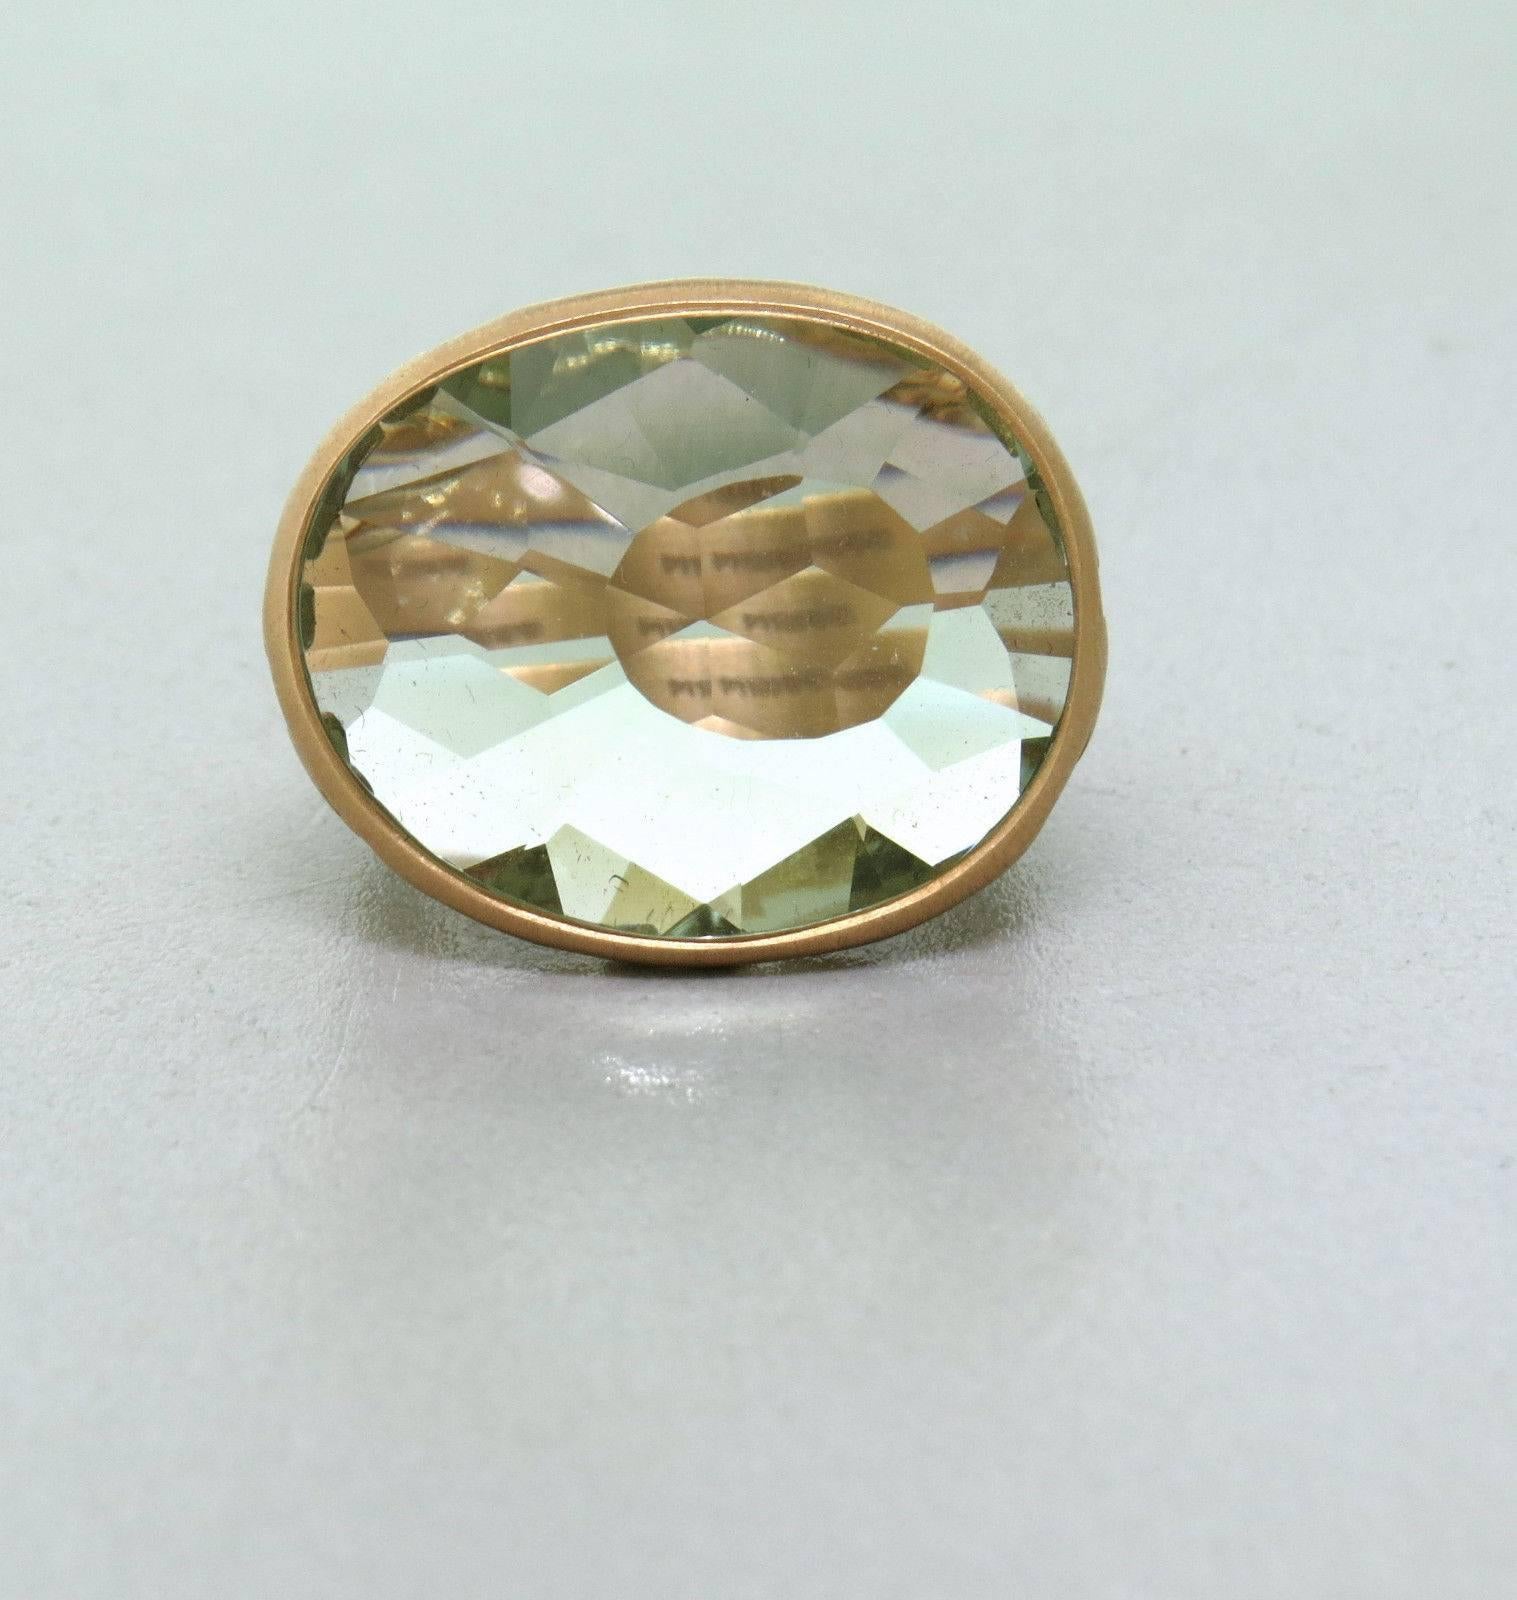 18k gold ring featuring prasiolite crafted by Pomellato for the Arabesque collection. Ring is a size 7 and ring top is 22mm x 25mm. Marked Pomellato 750. Weight is 12.9 grams. 